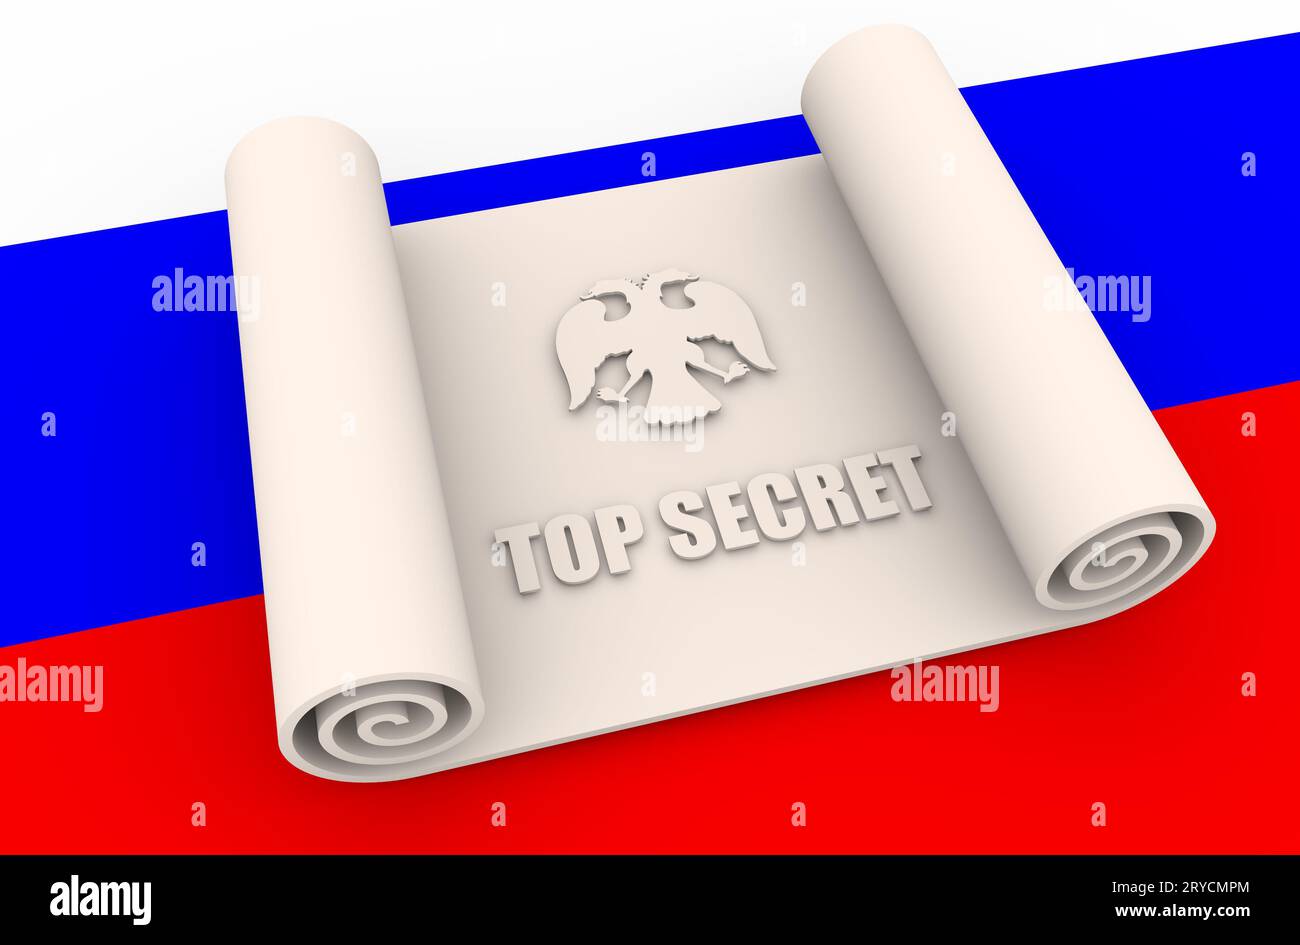 Top secret paper scroll on background textured by Russian flag Stock Photo